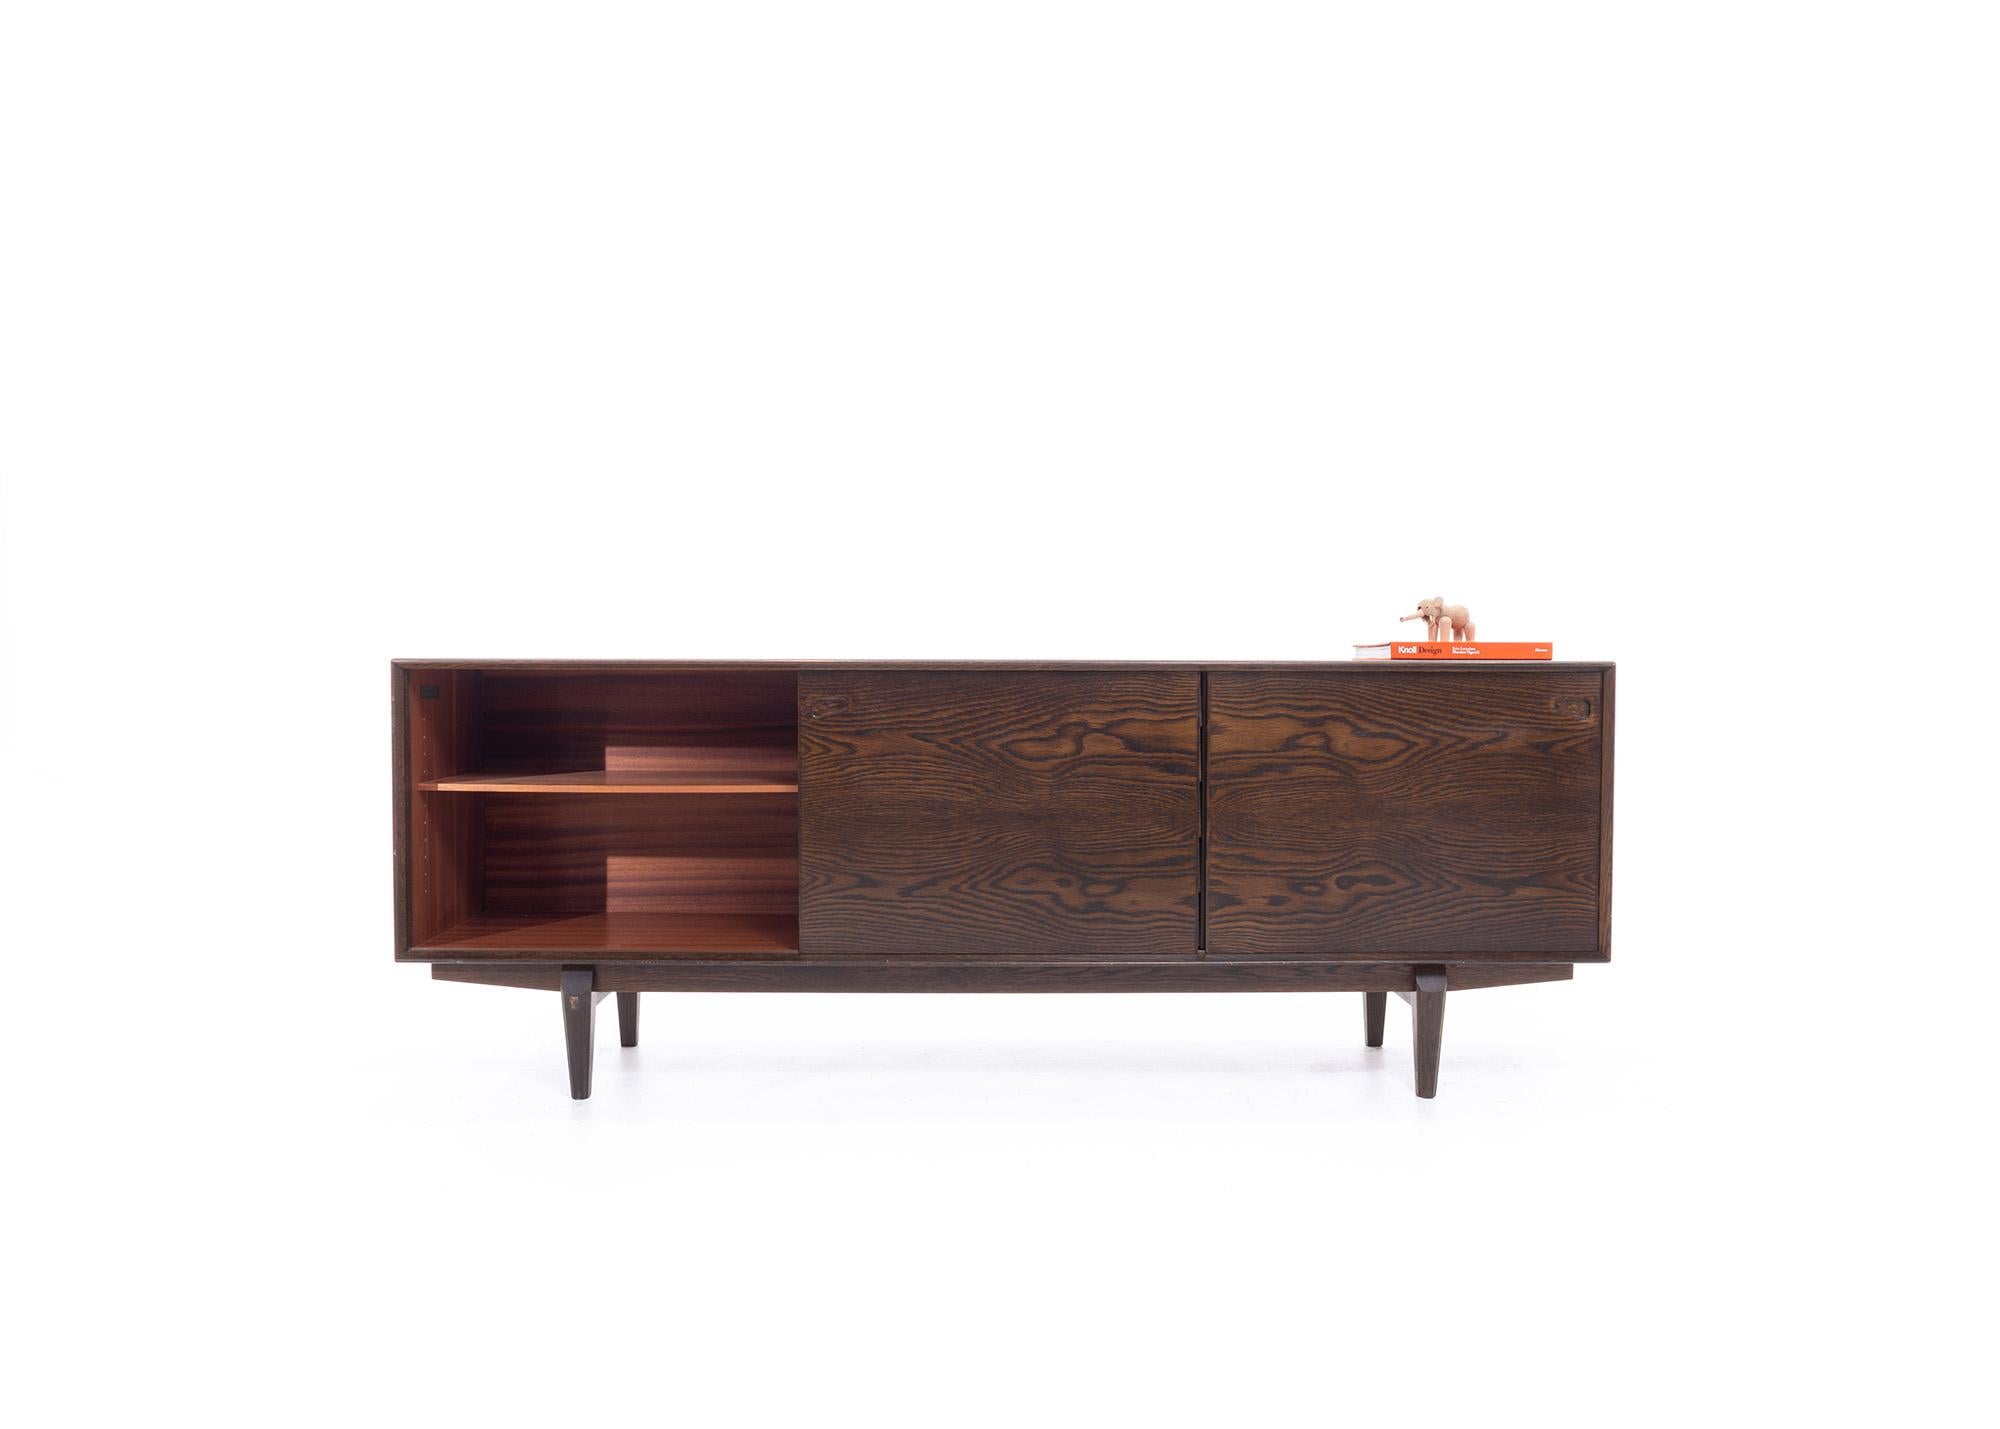 Transform your dining room or living space into a sophisticated oasis with this Mid-Century Modern Sideboard by Egon Kristensen for Skovby Møbelfabrik. This timeless classic boasts an elegant and minimalist design that's sure to impress your